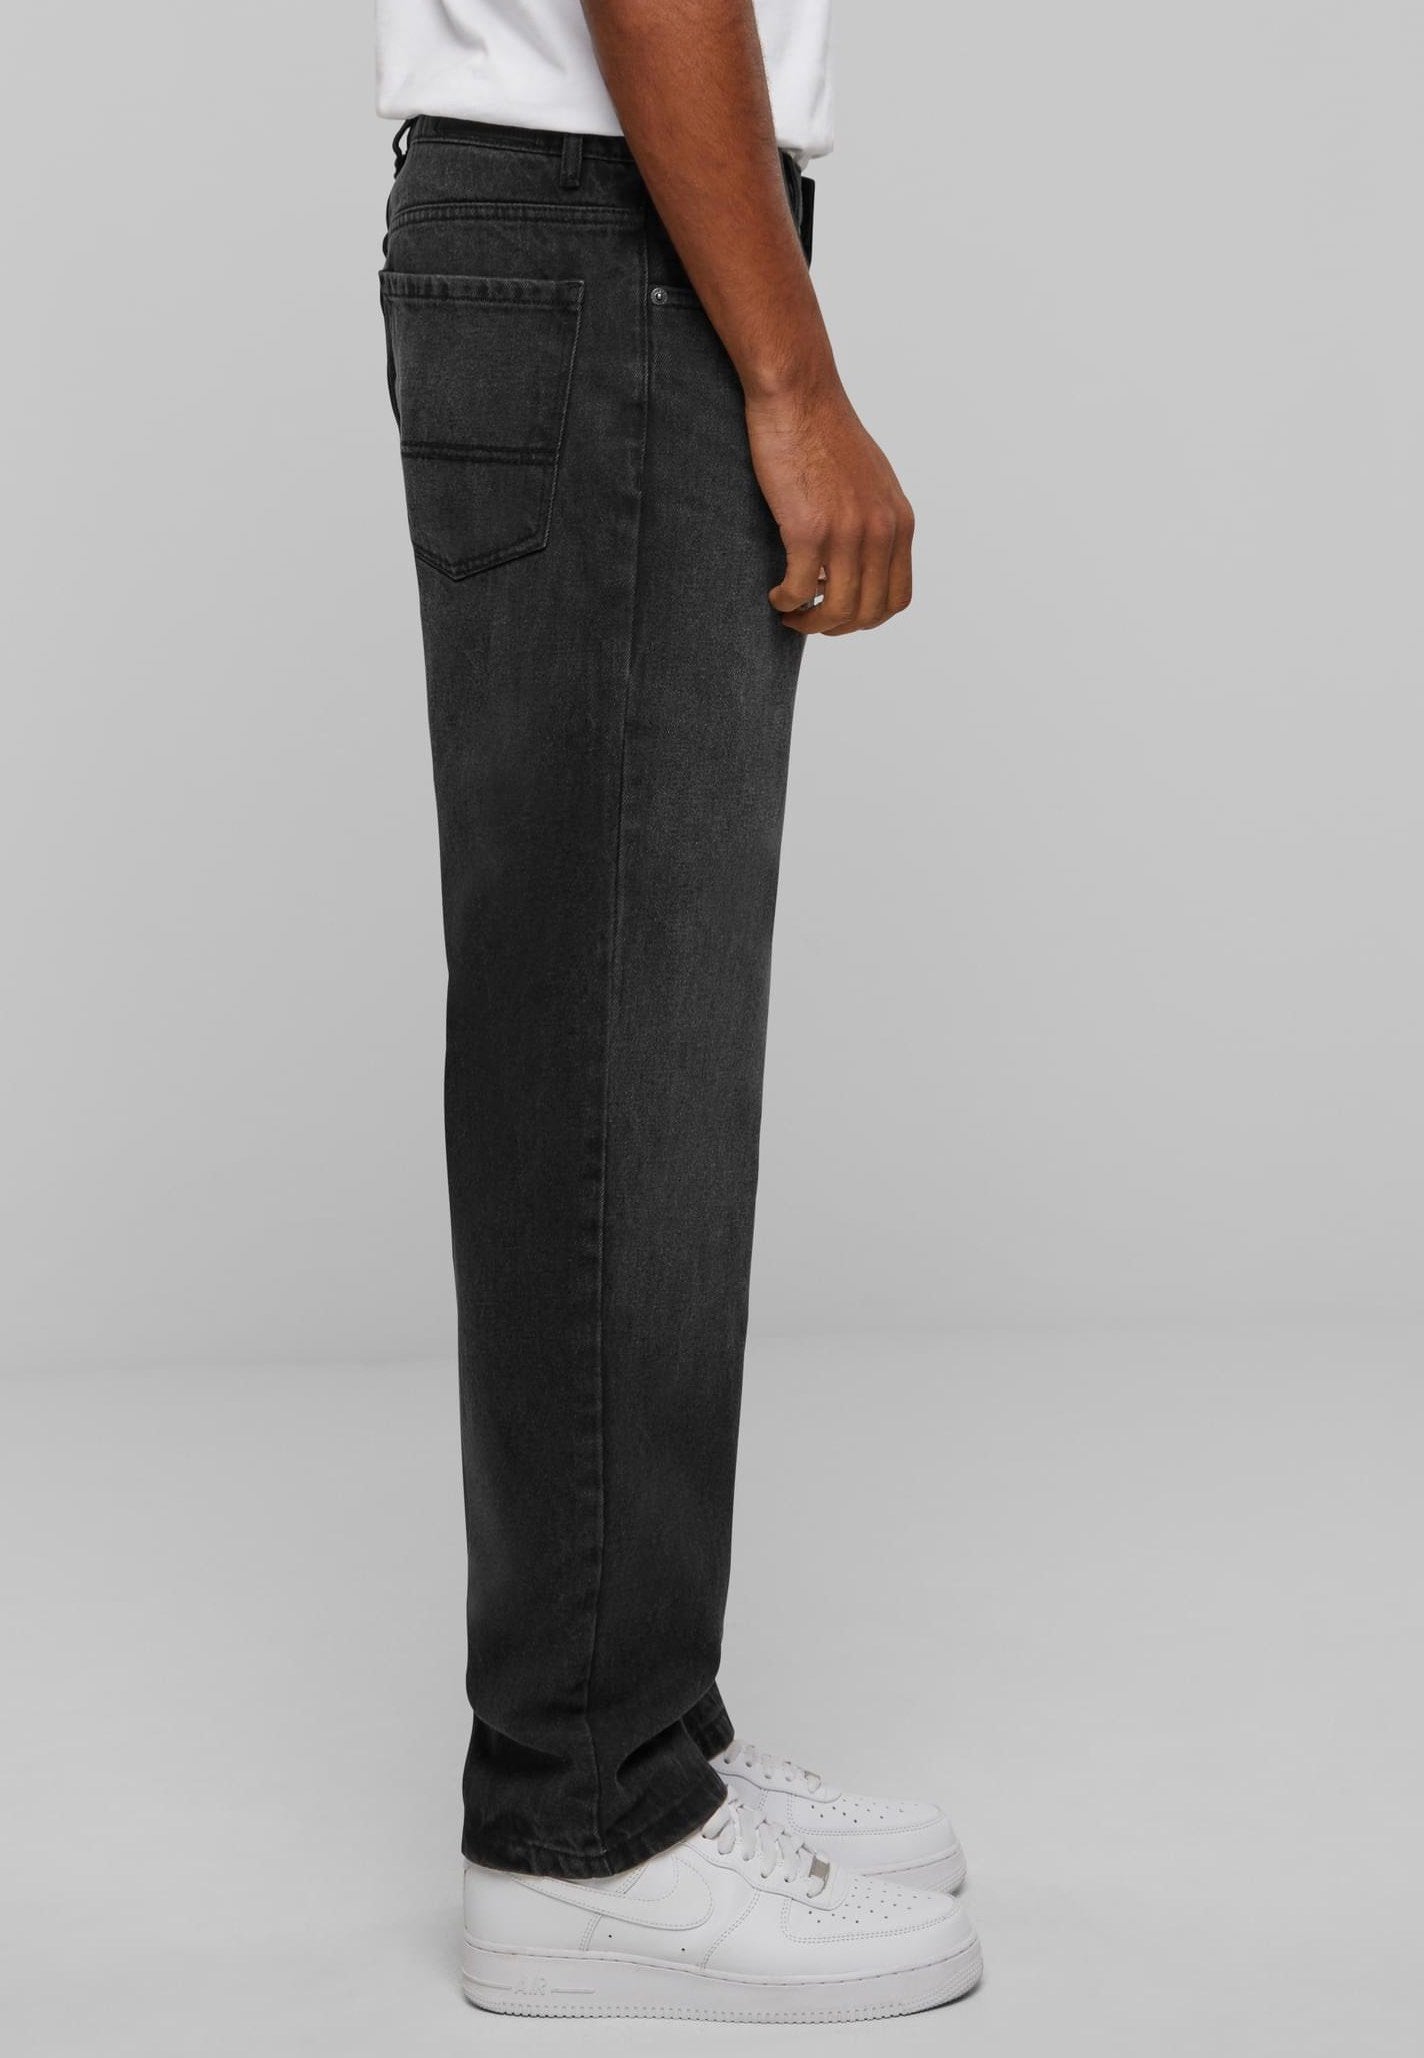 Urban Classics - Heavy Ounce Straight Fit Black Washed - Jeans